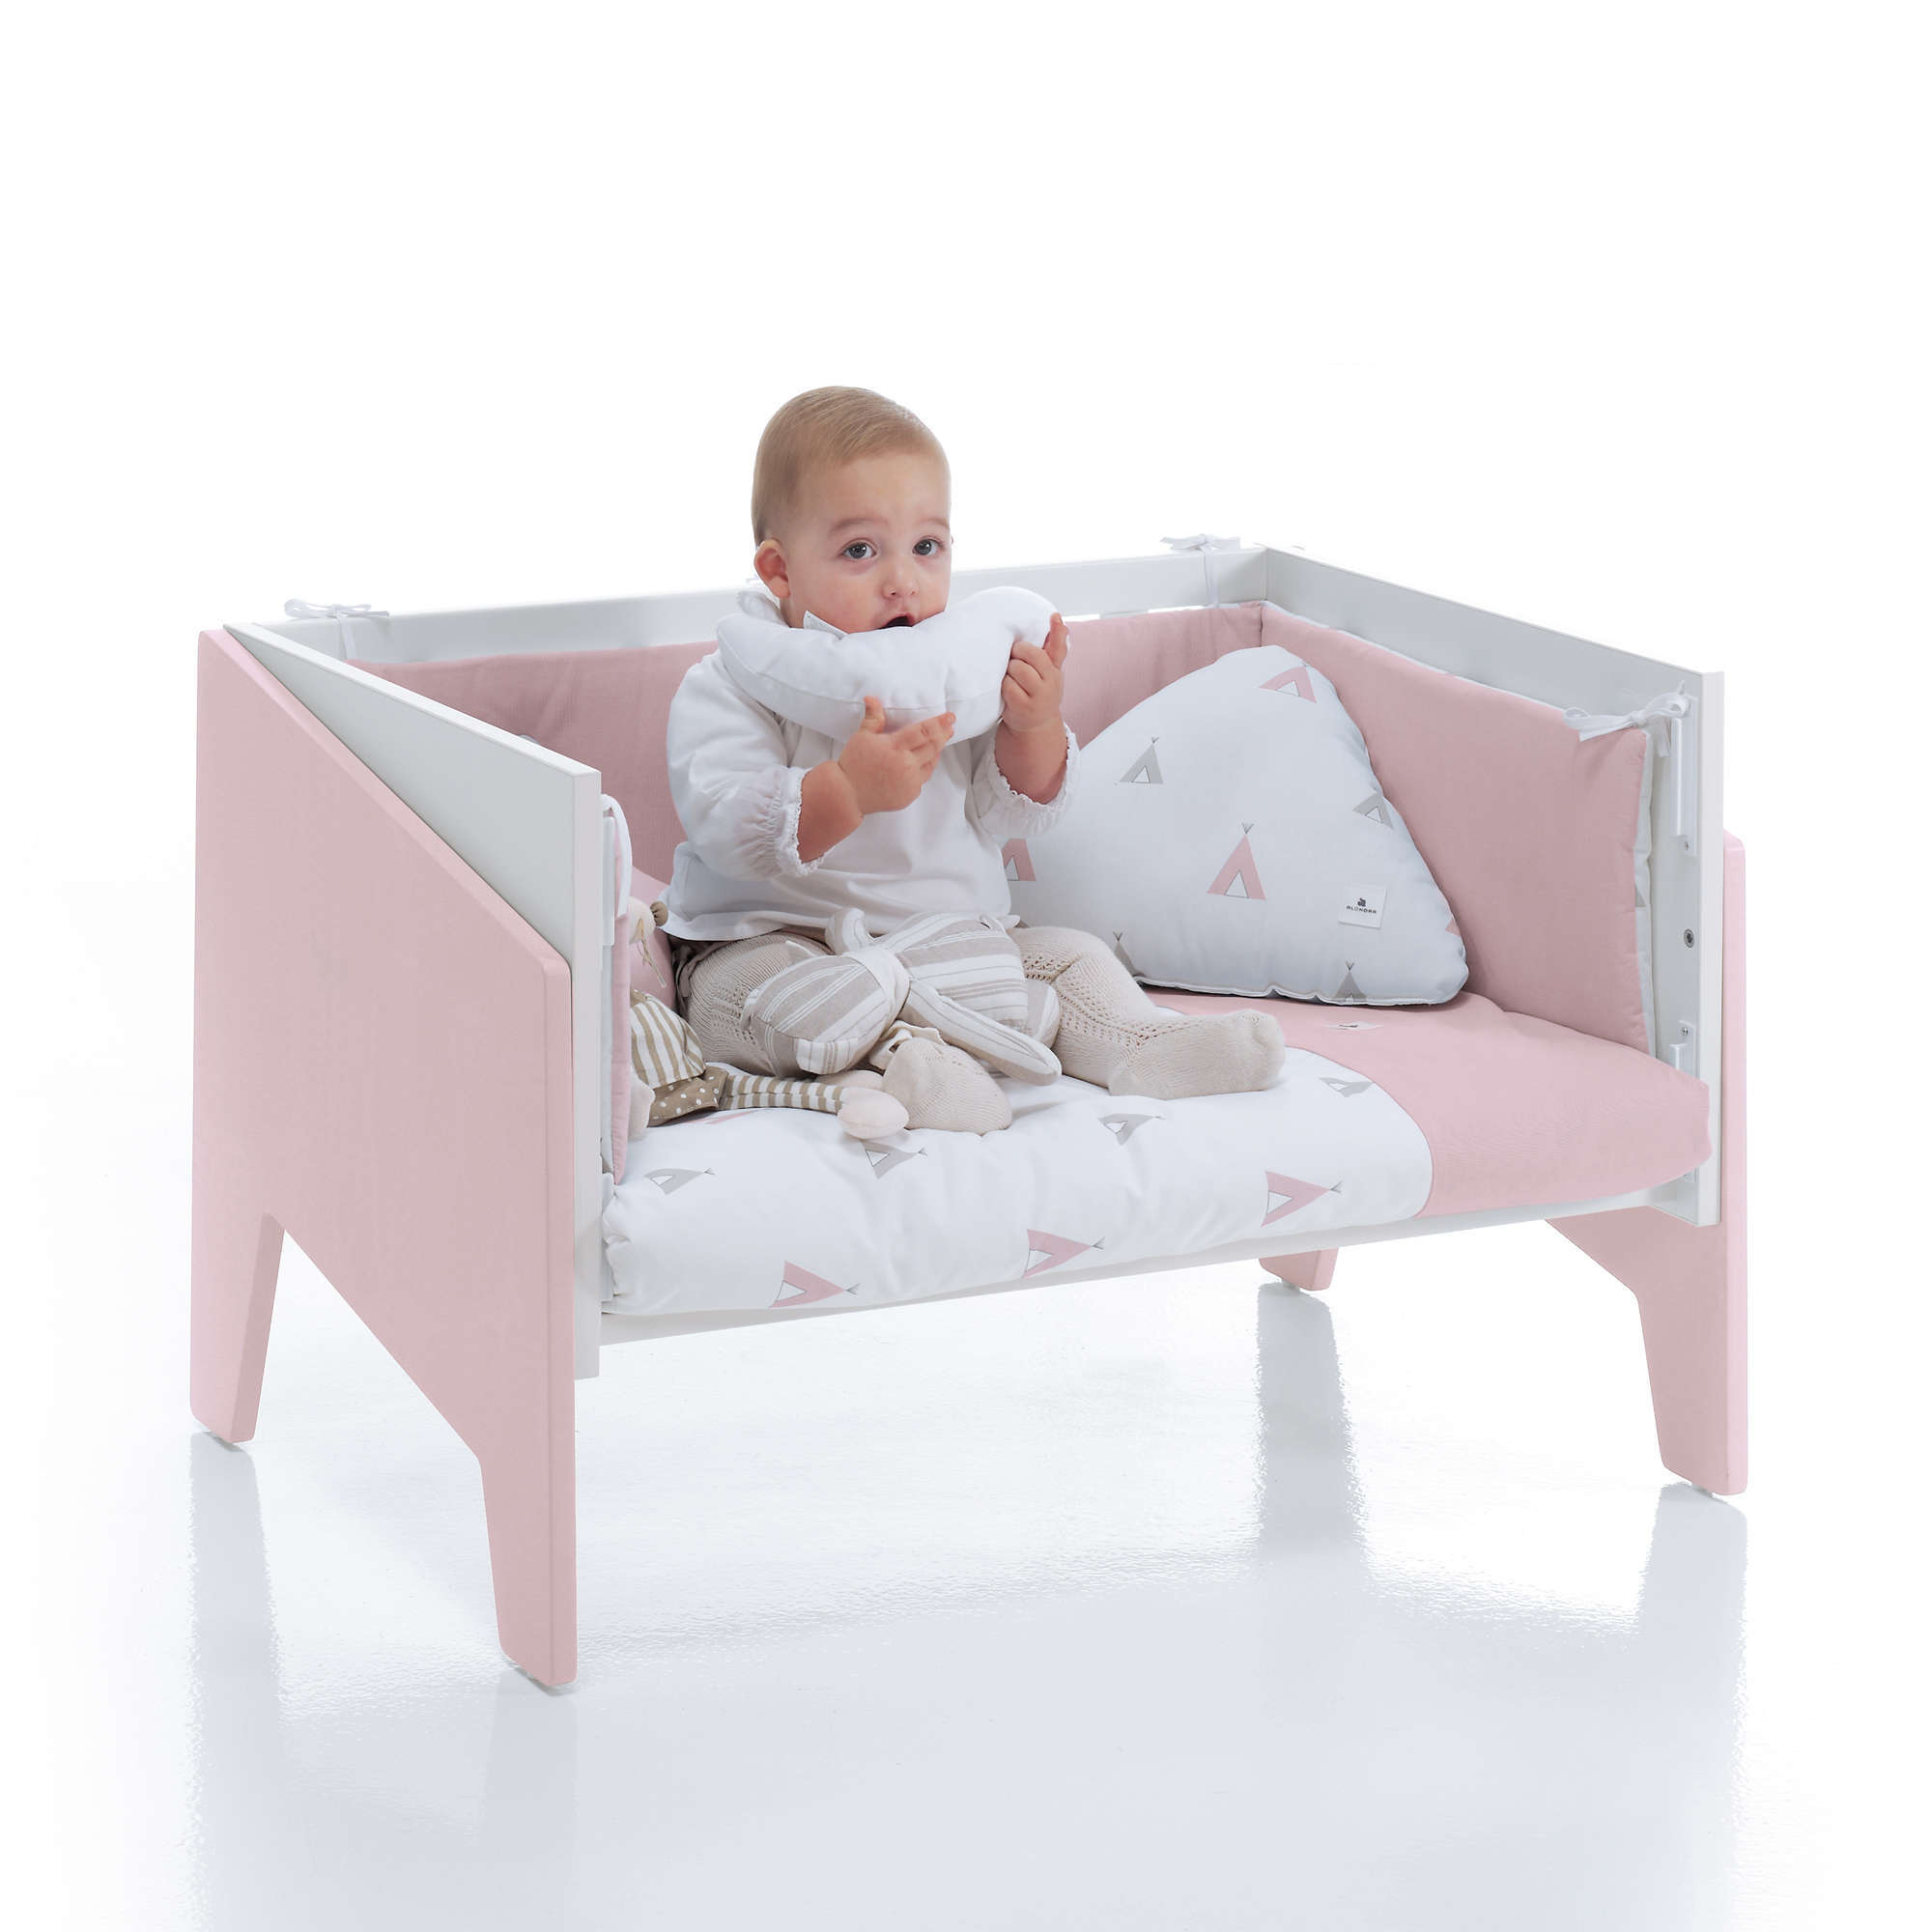 Co-sleeping crib Equo 5in1Alondra stage children's couch